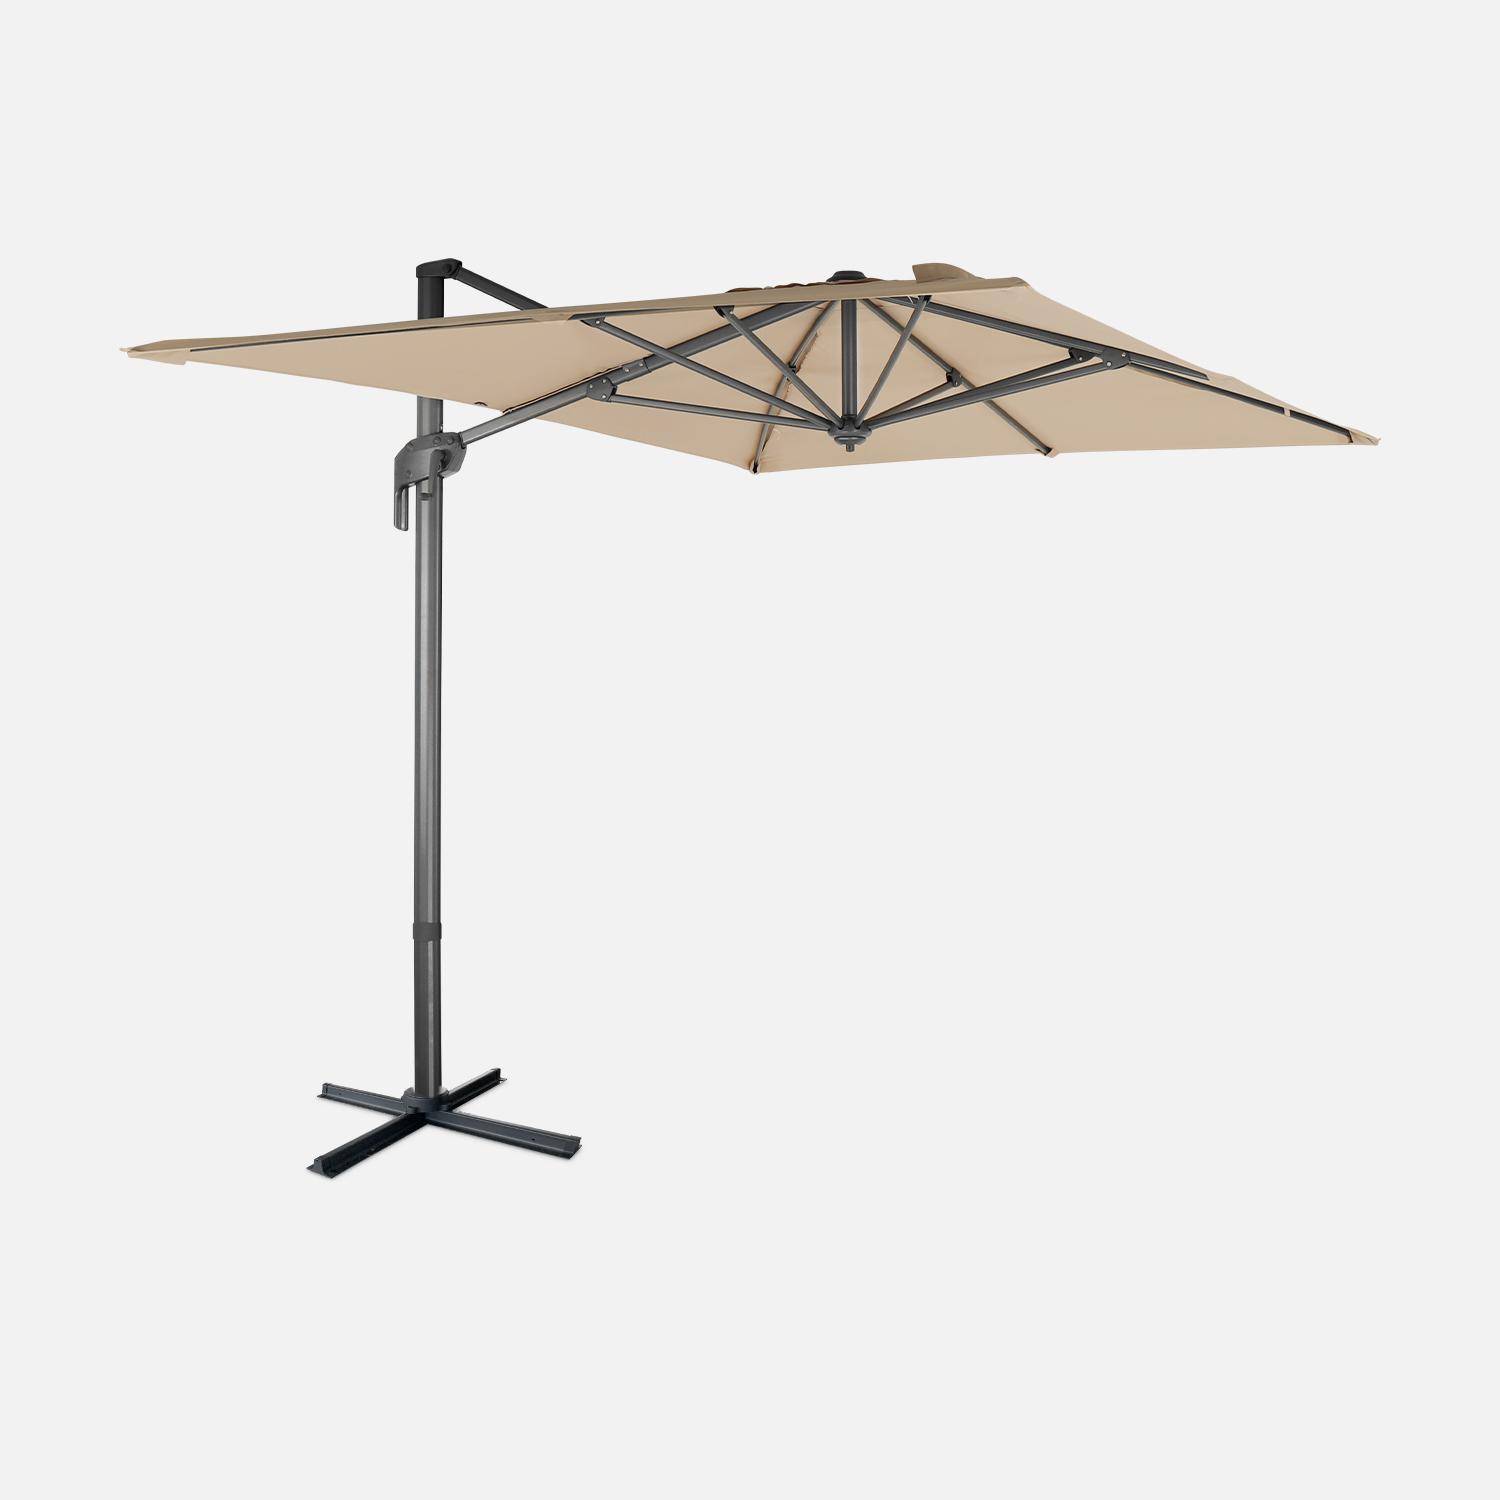 2x3m rectangular cantilever paraso - parasol can be tilted, folded and rotated 360 degreesl - Antibes - Beige Photo2